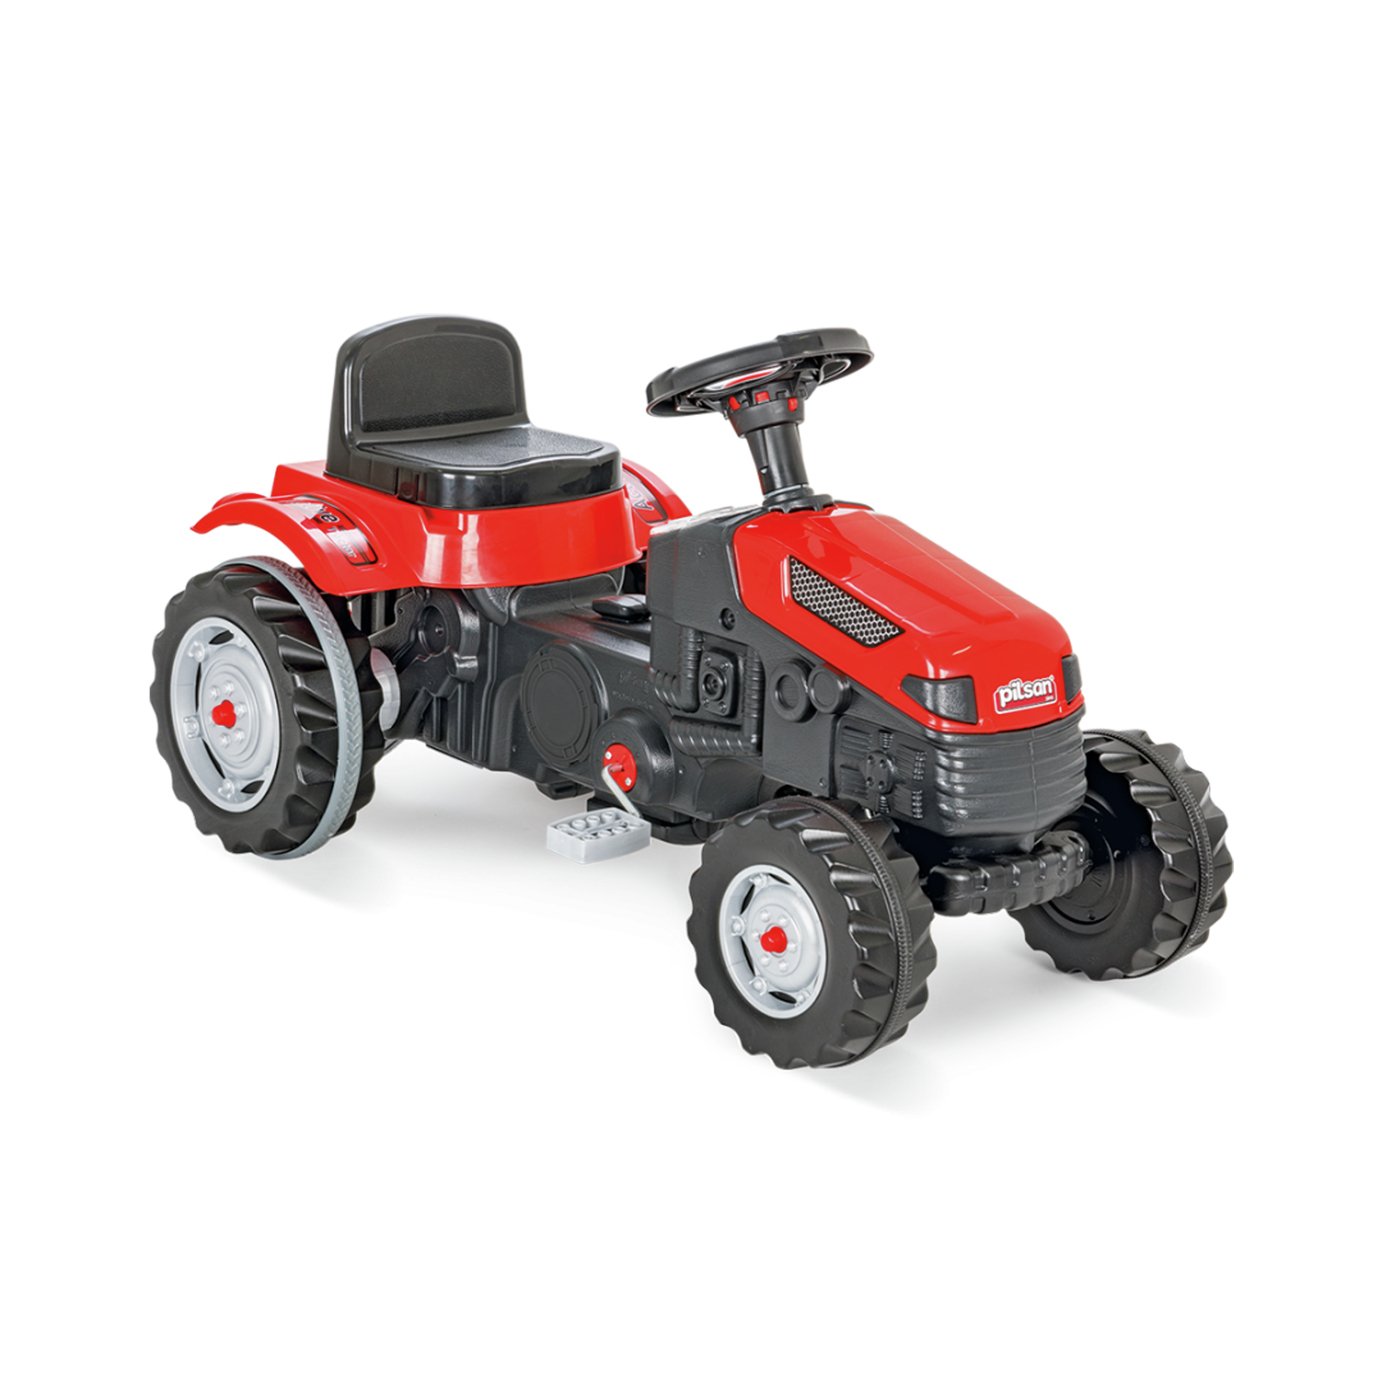 Pilsan Active Pedal Tractor Review